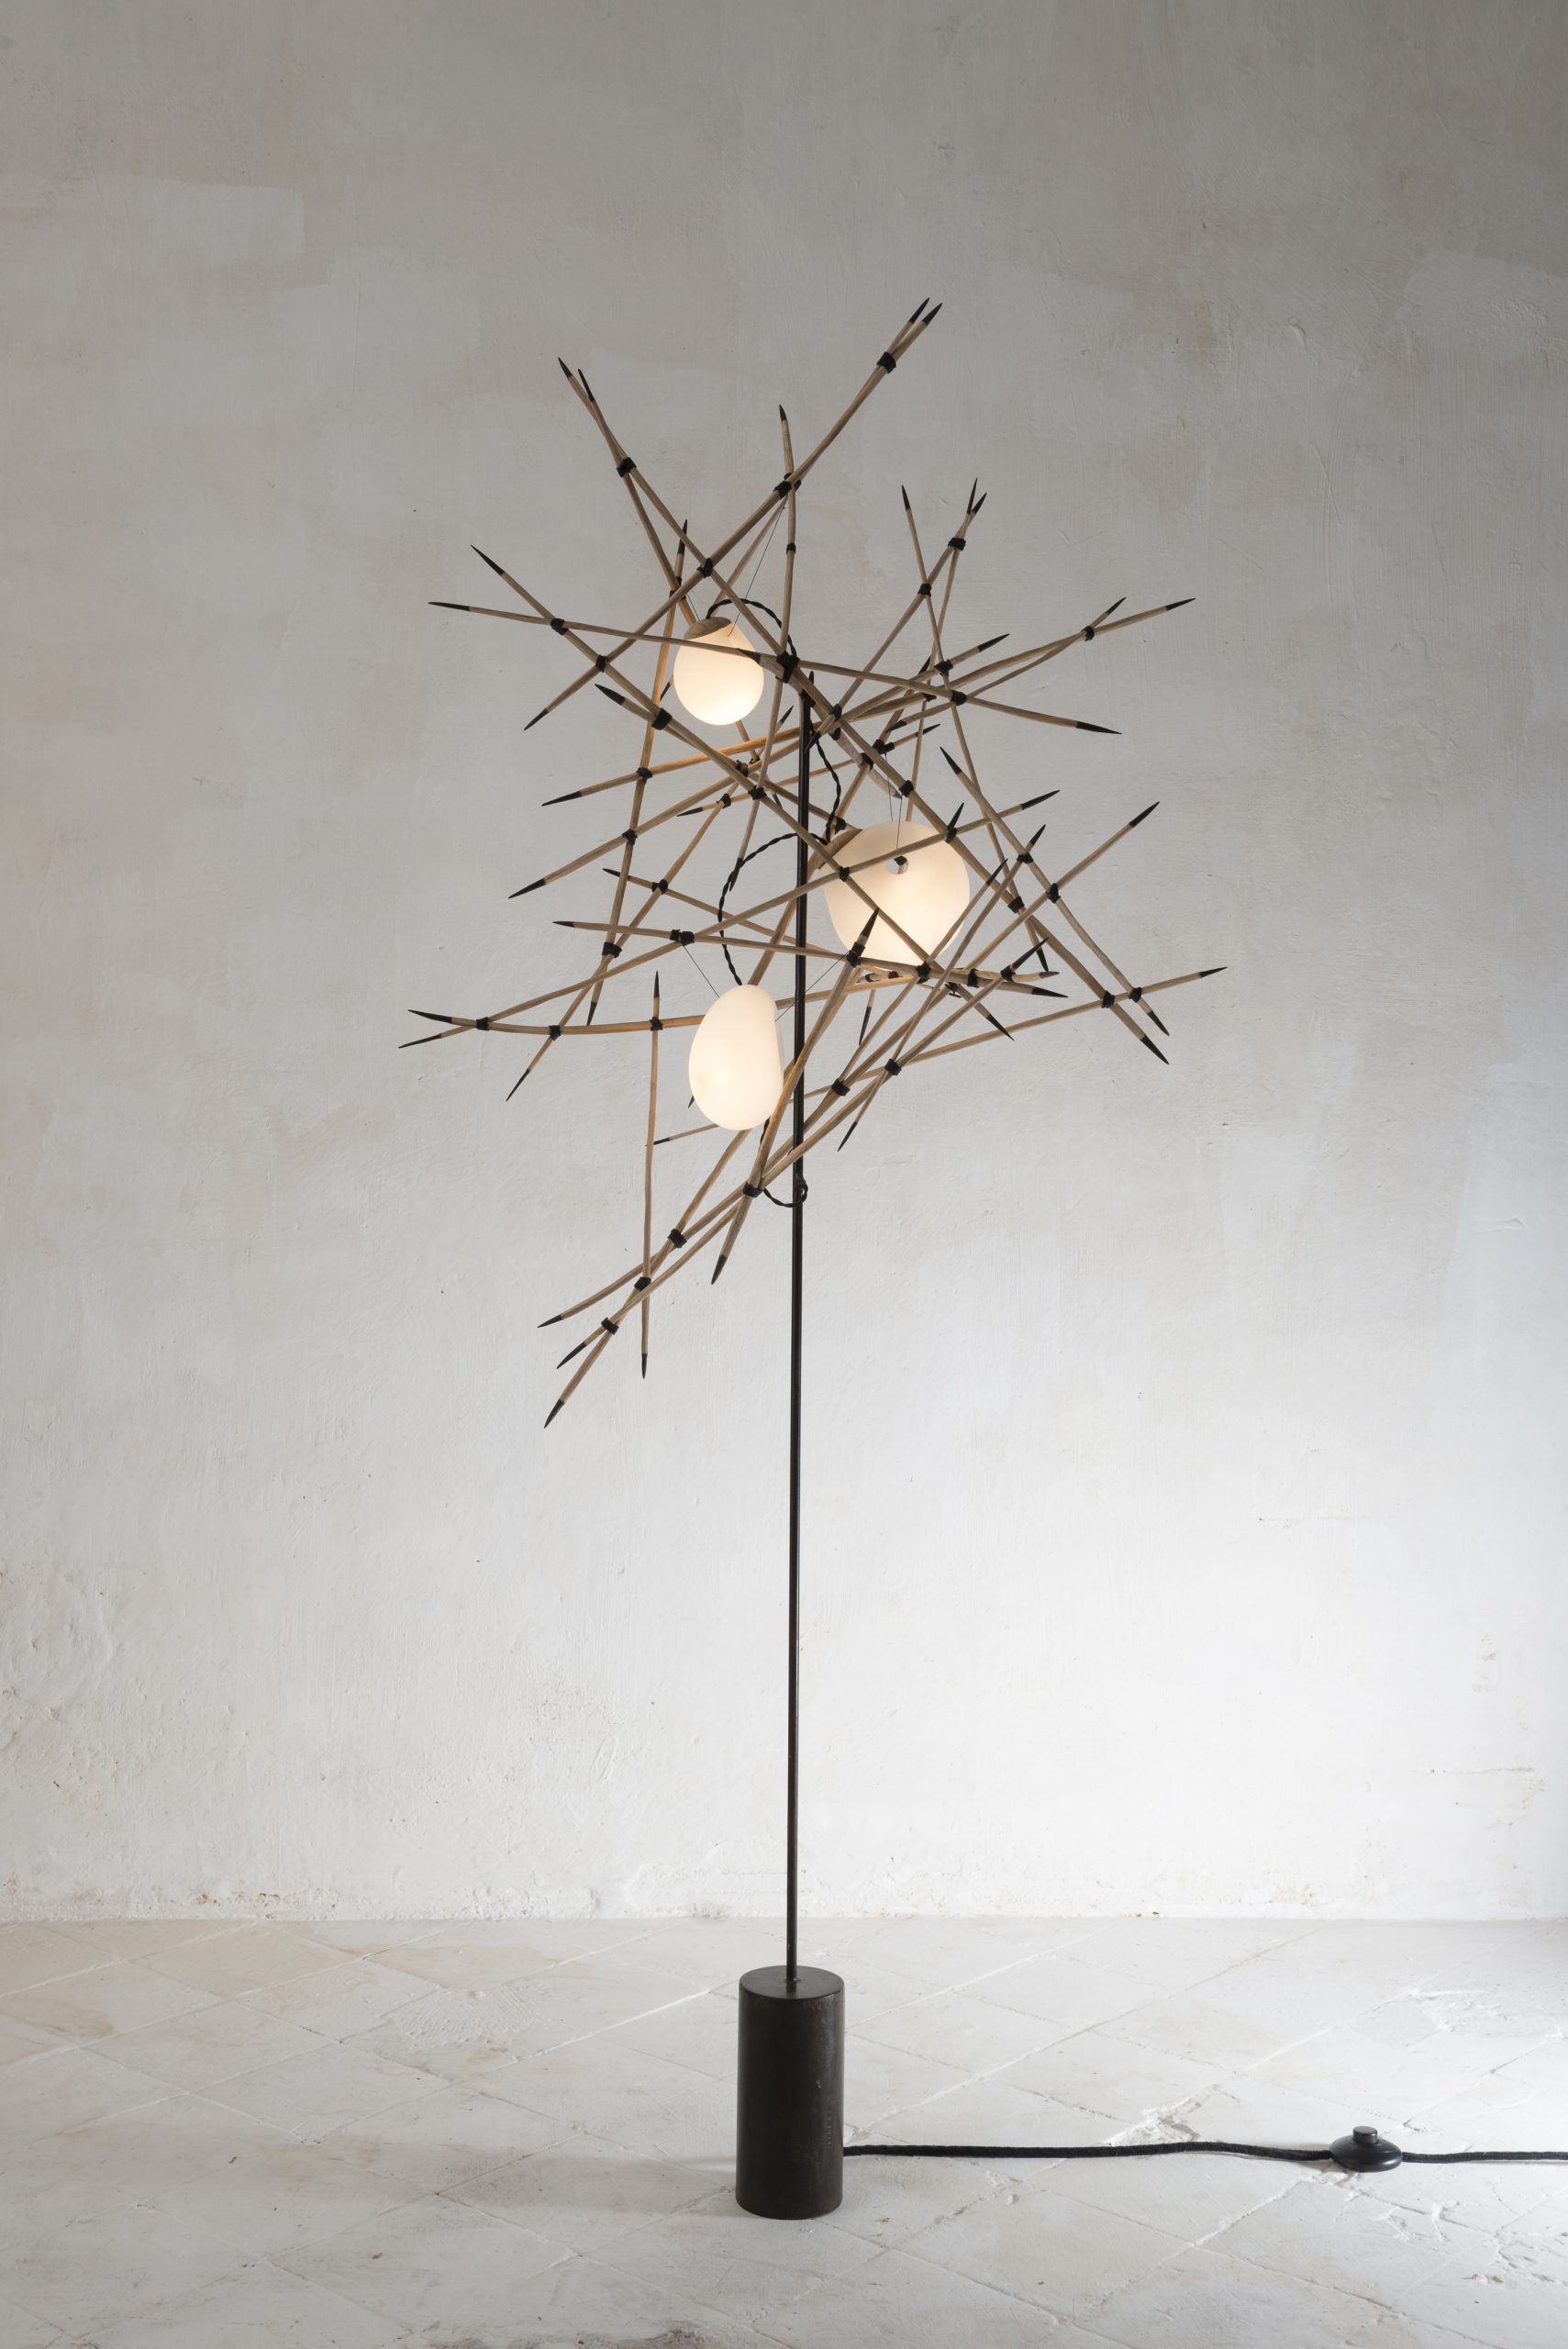 A floor lamp that looks like handfuls of matchsticks